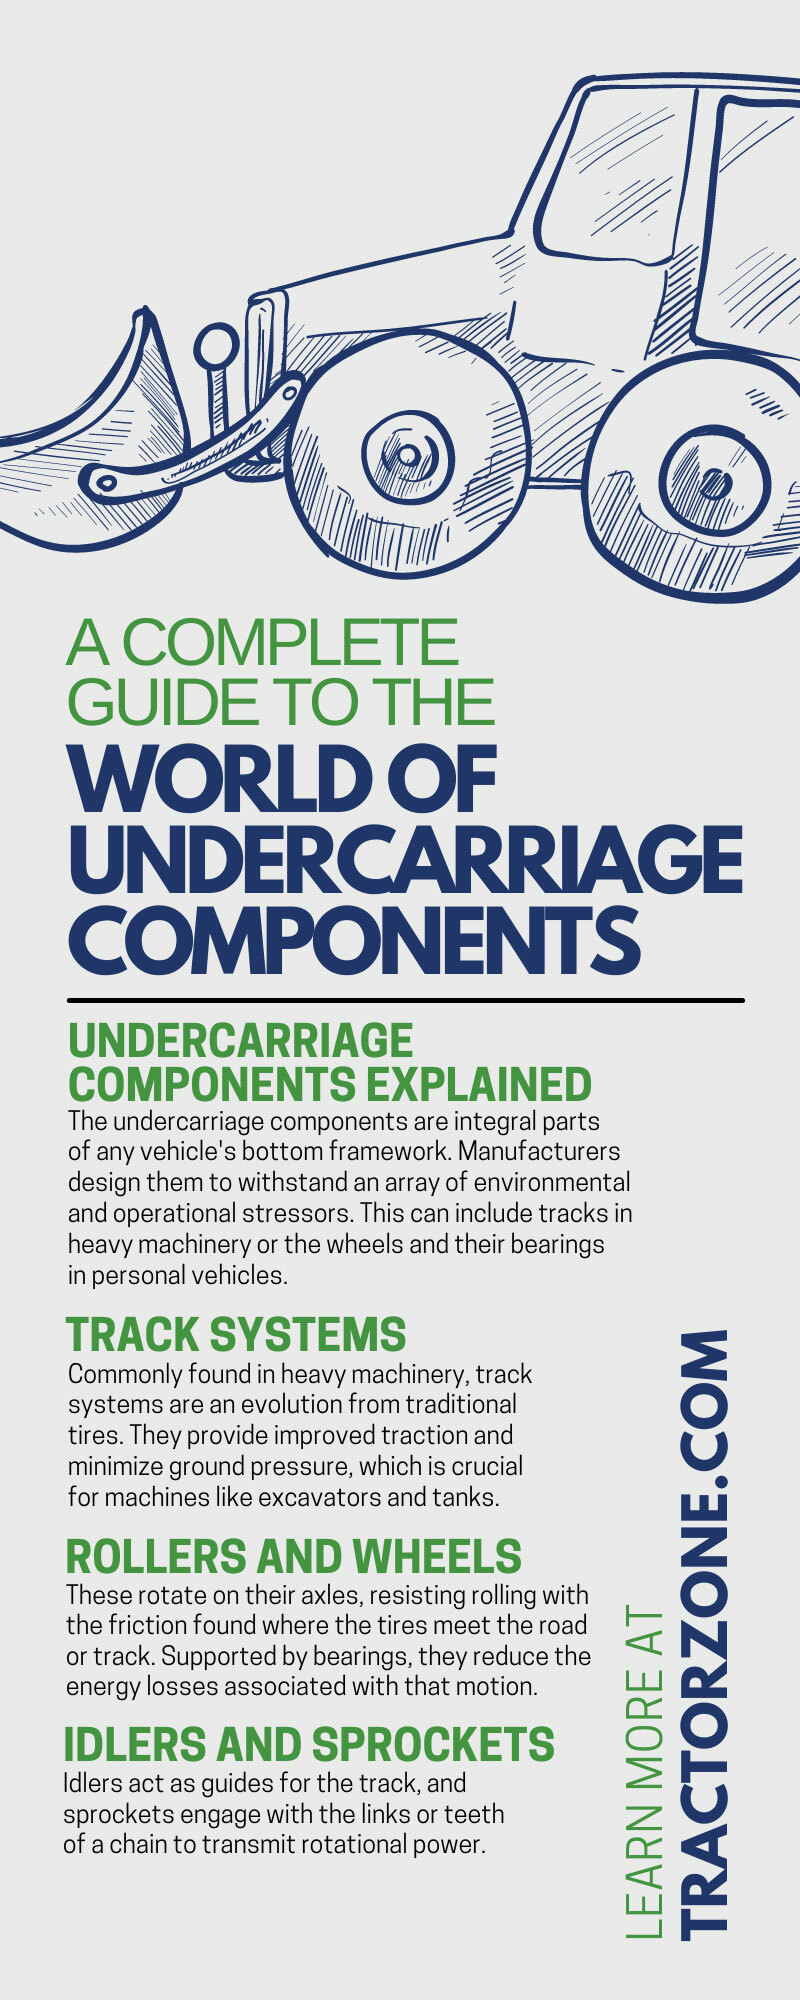 A Complete Guide to the World of Undercarriage Components